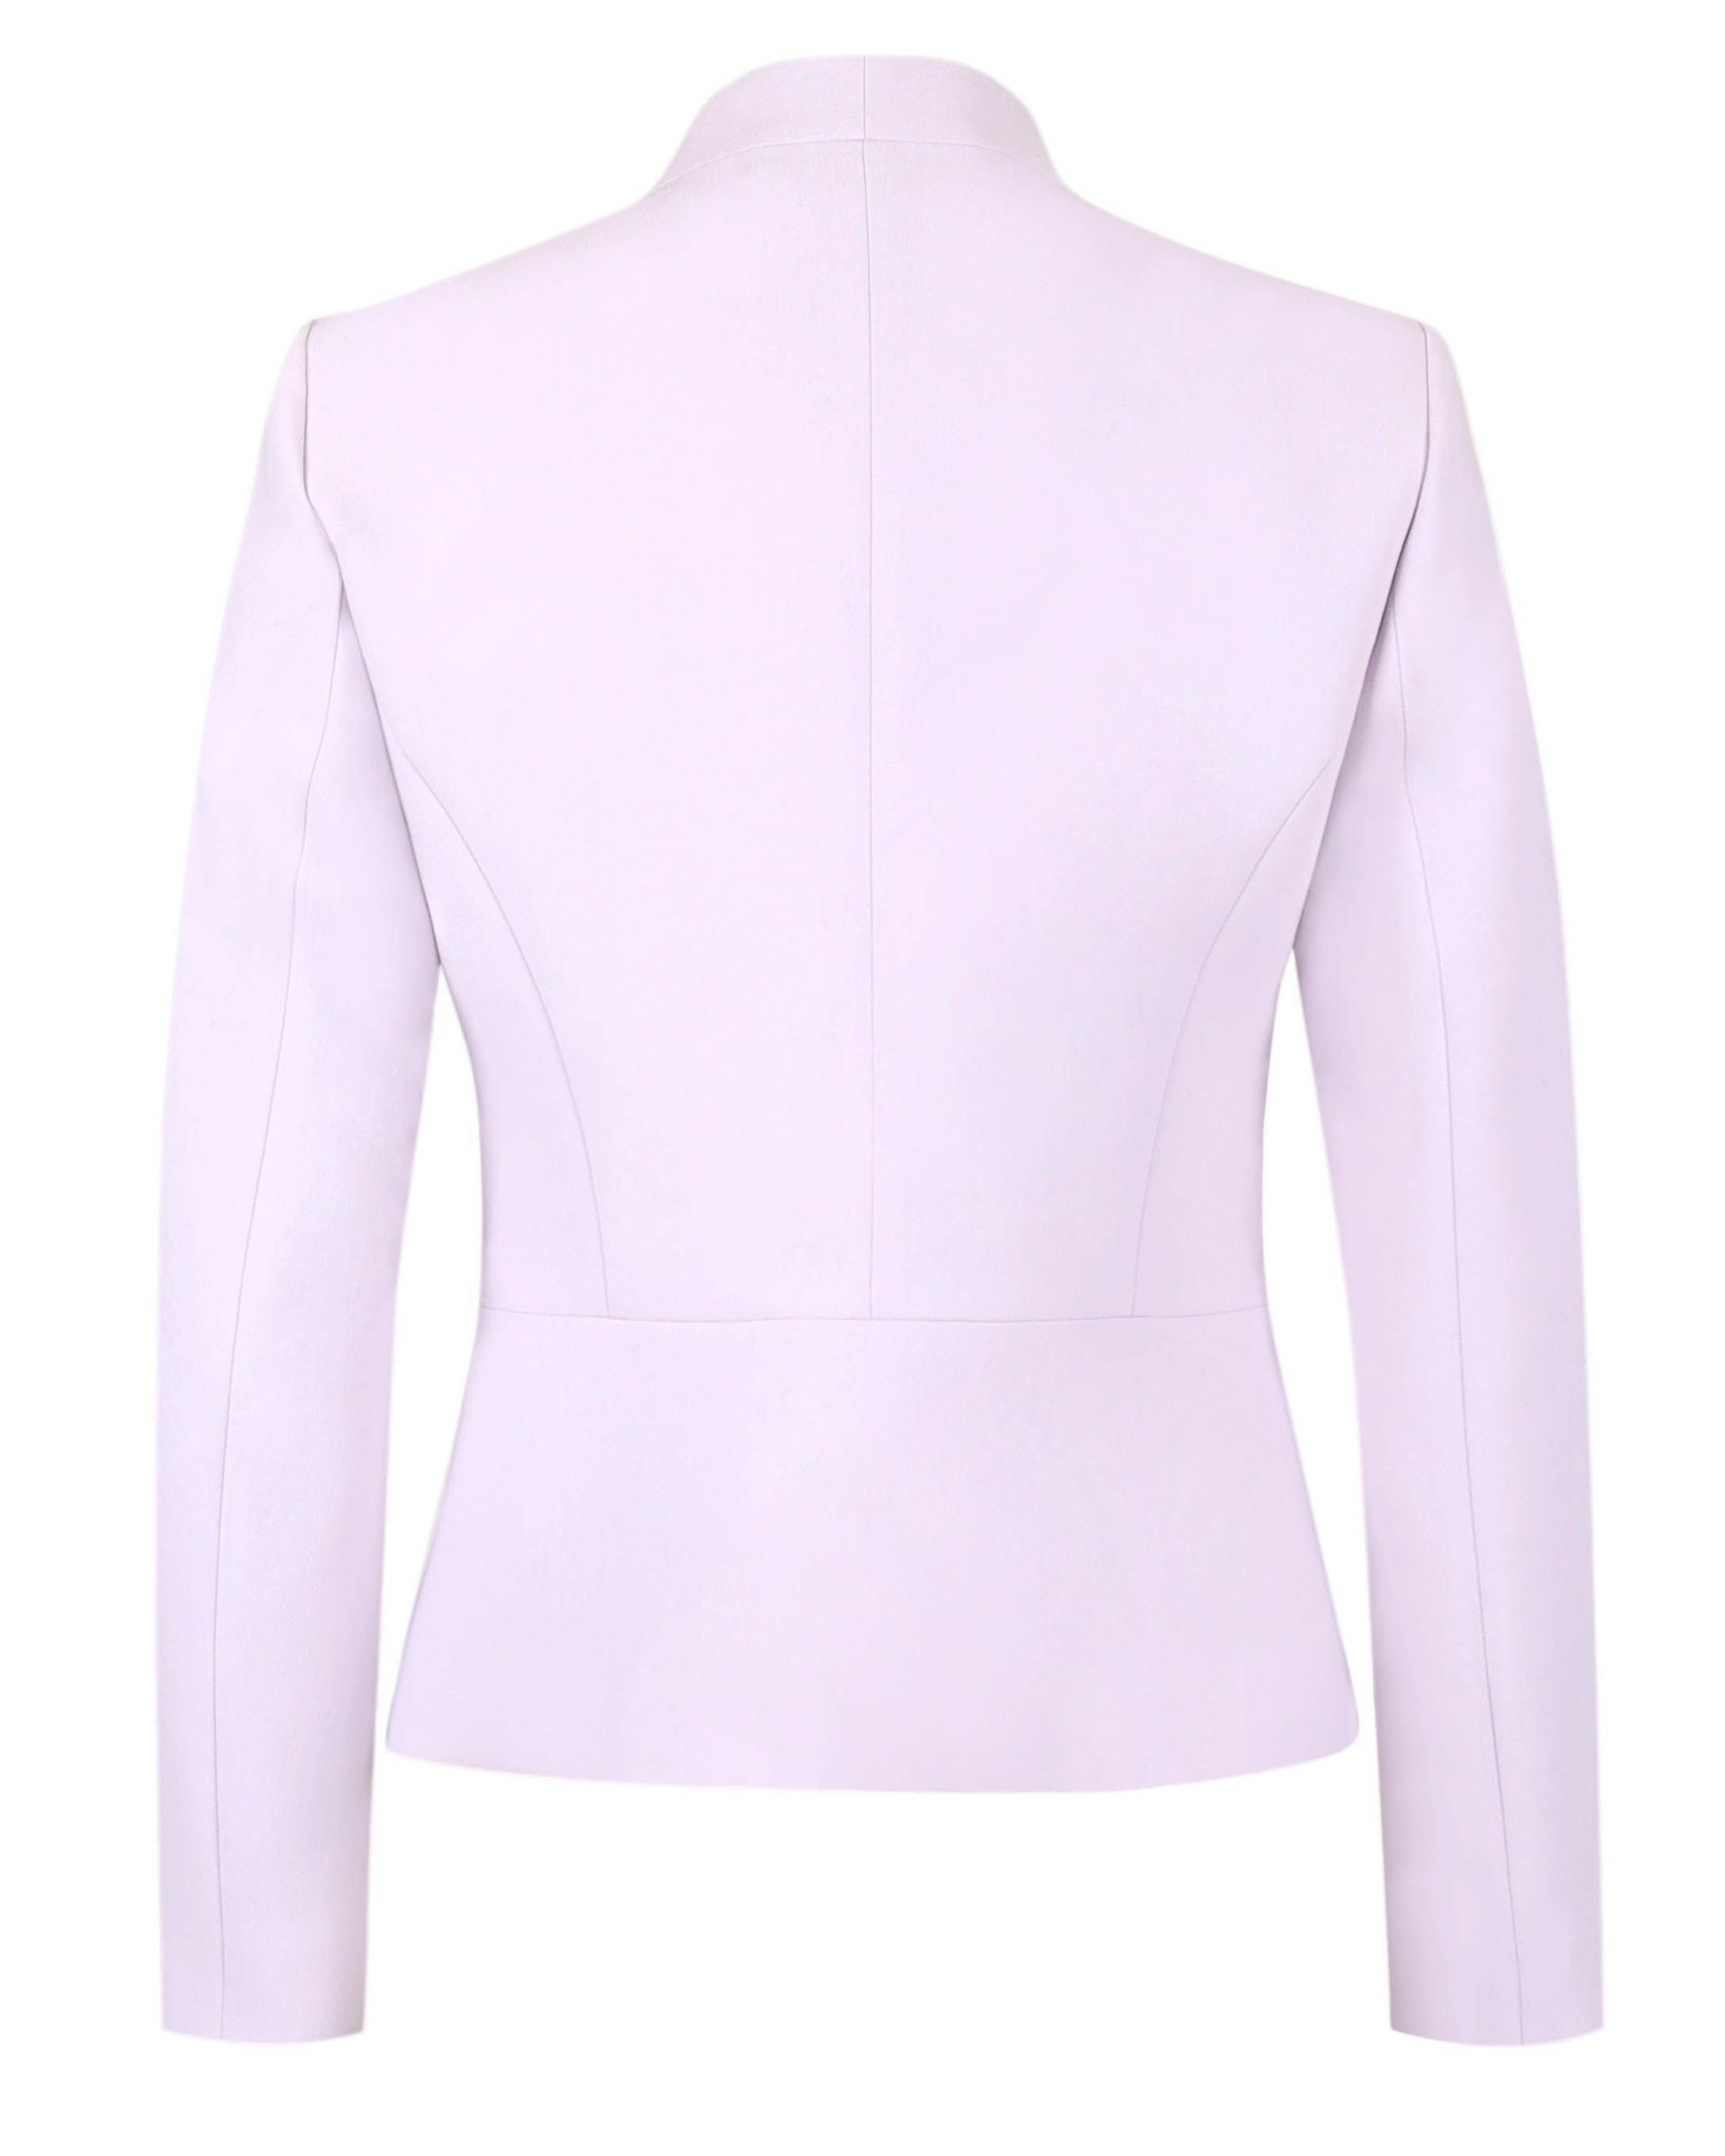 Fitted jacket, without lapels 2